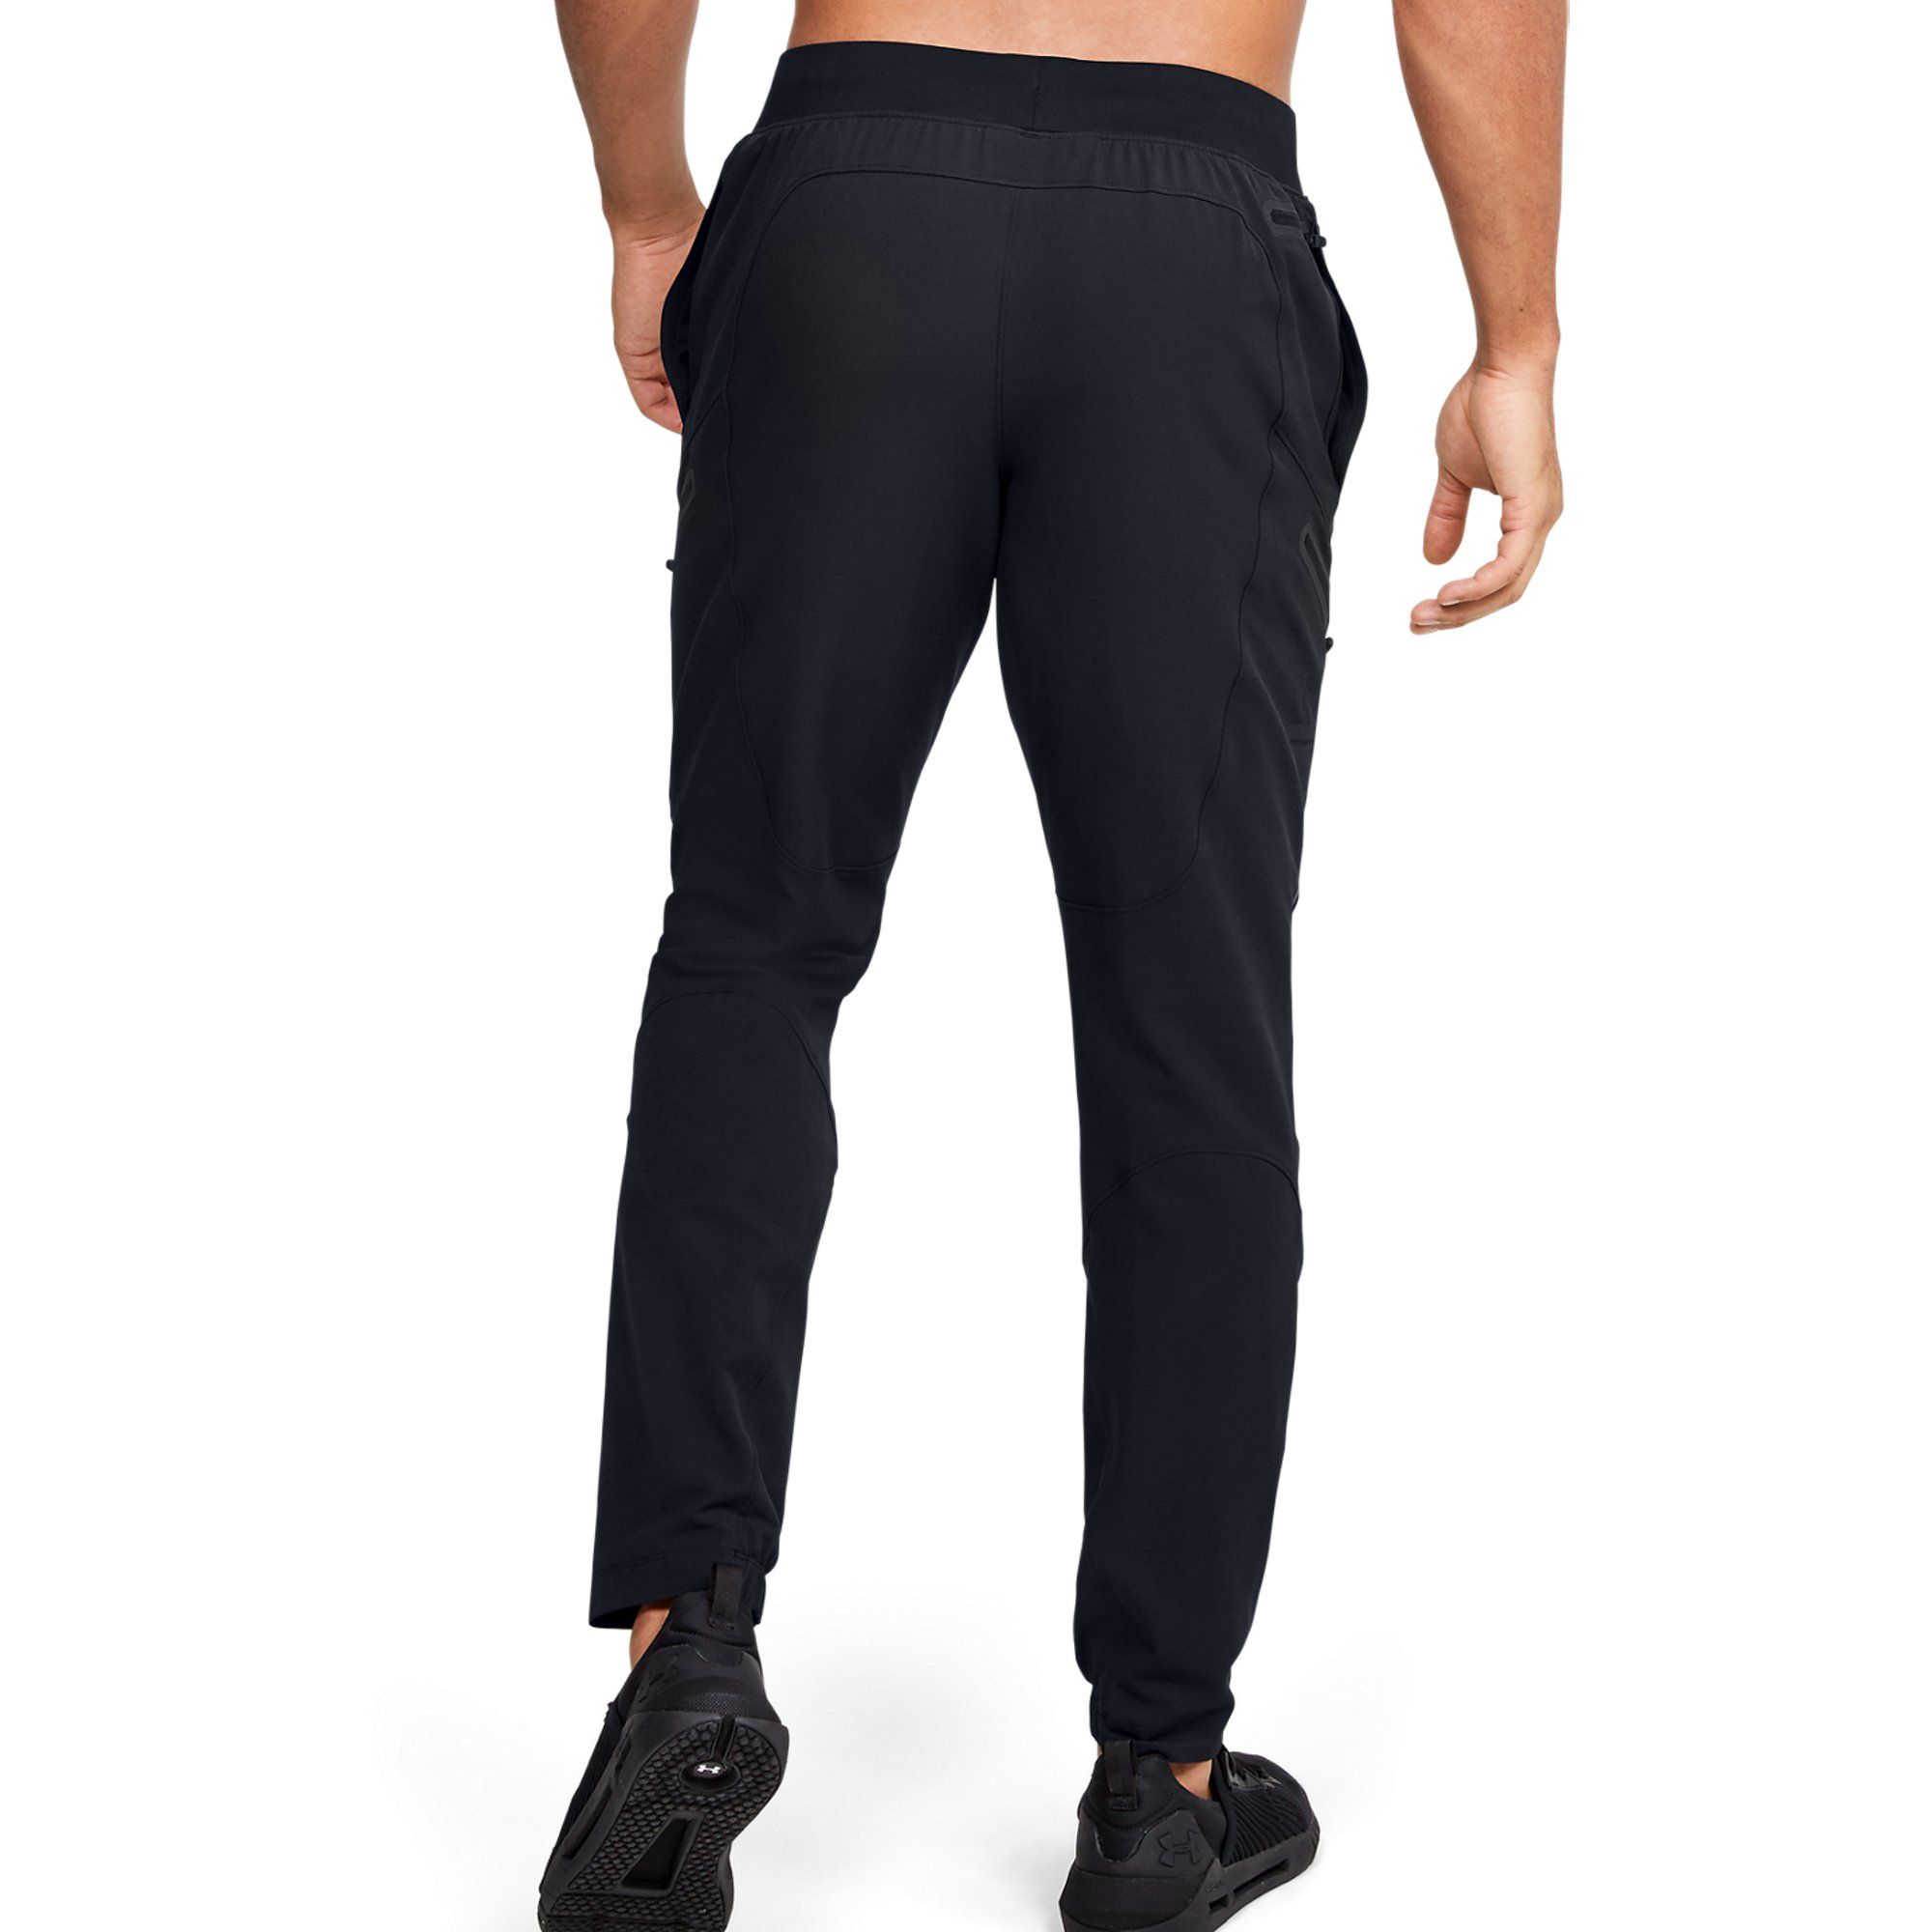  Under Armour Unstoppable Cargo Pants - Black 